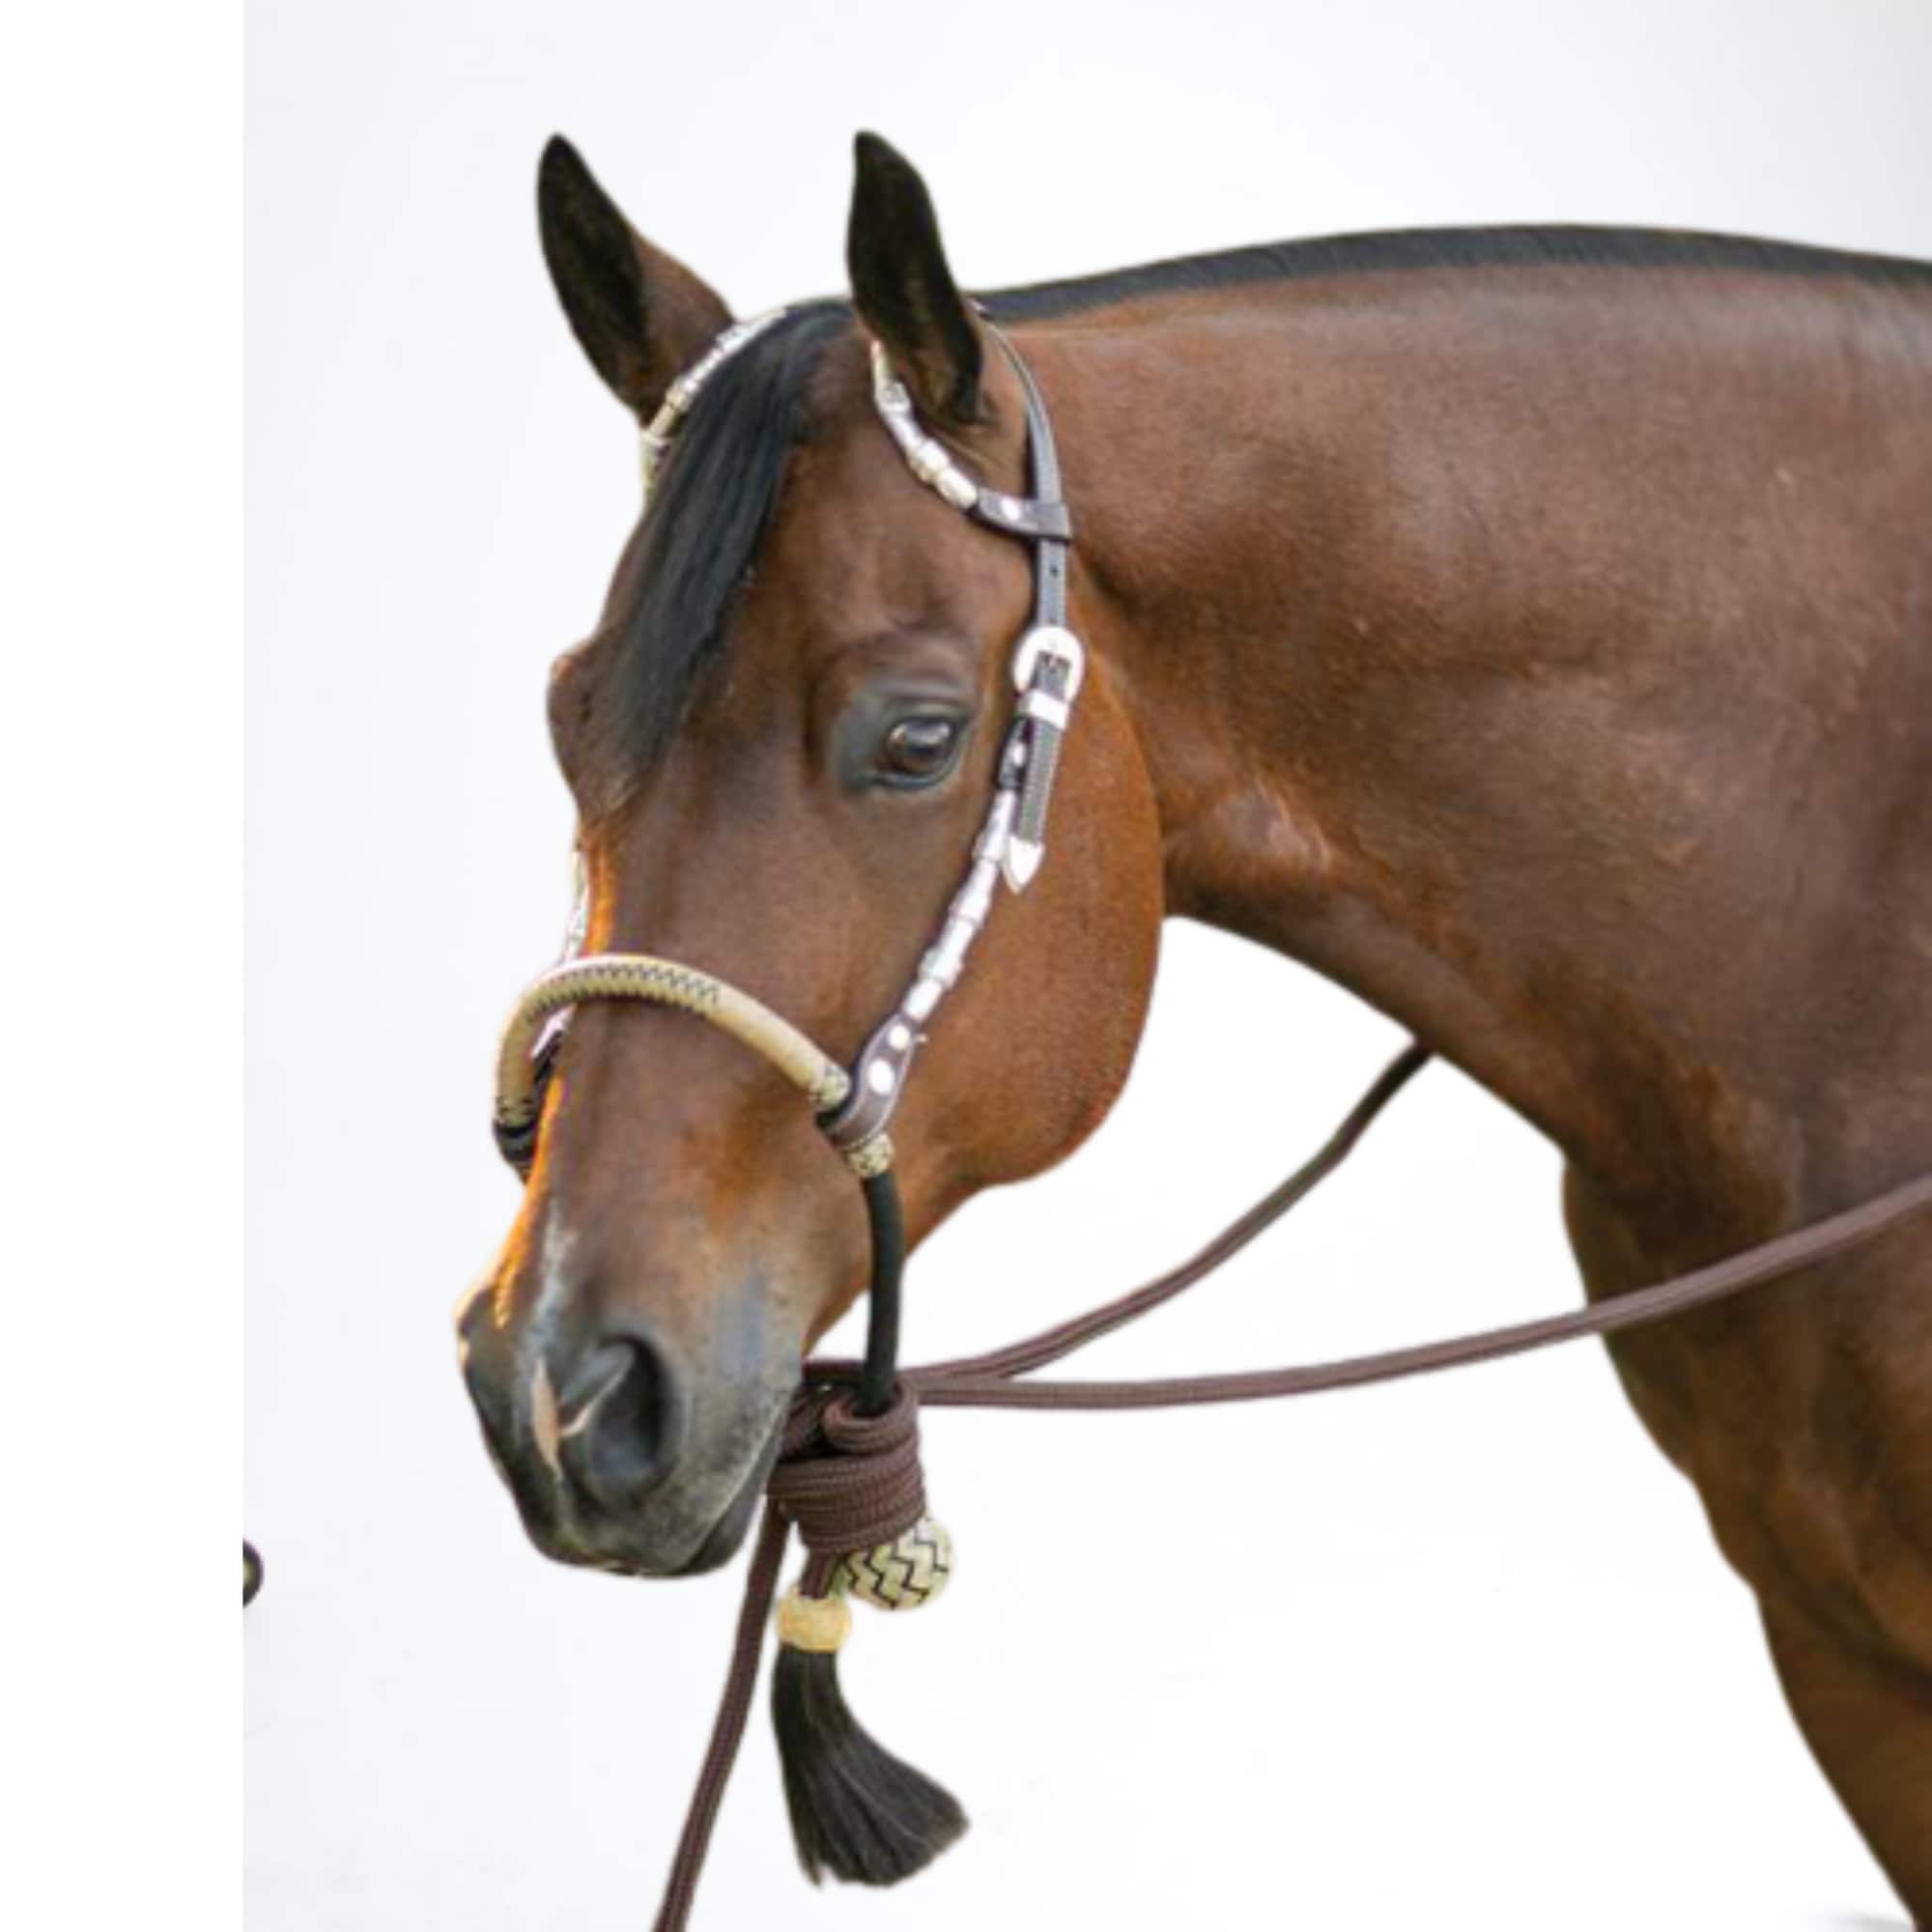 Is this bosal a good fit for this mares head? : r/Horses